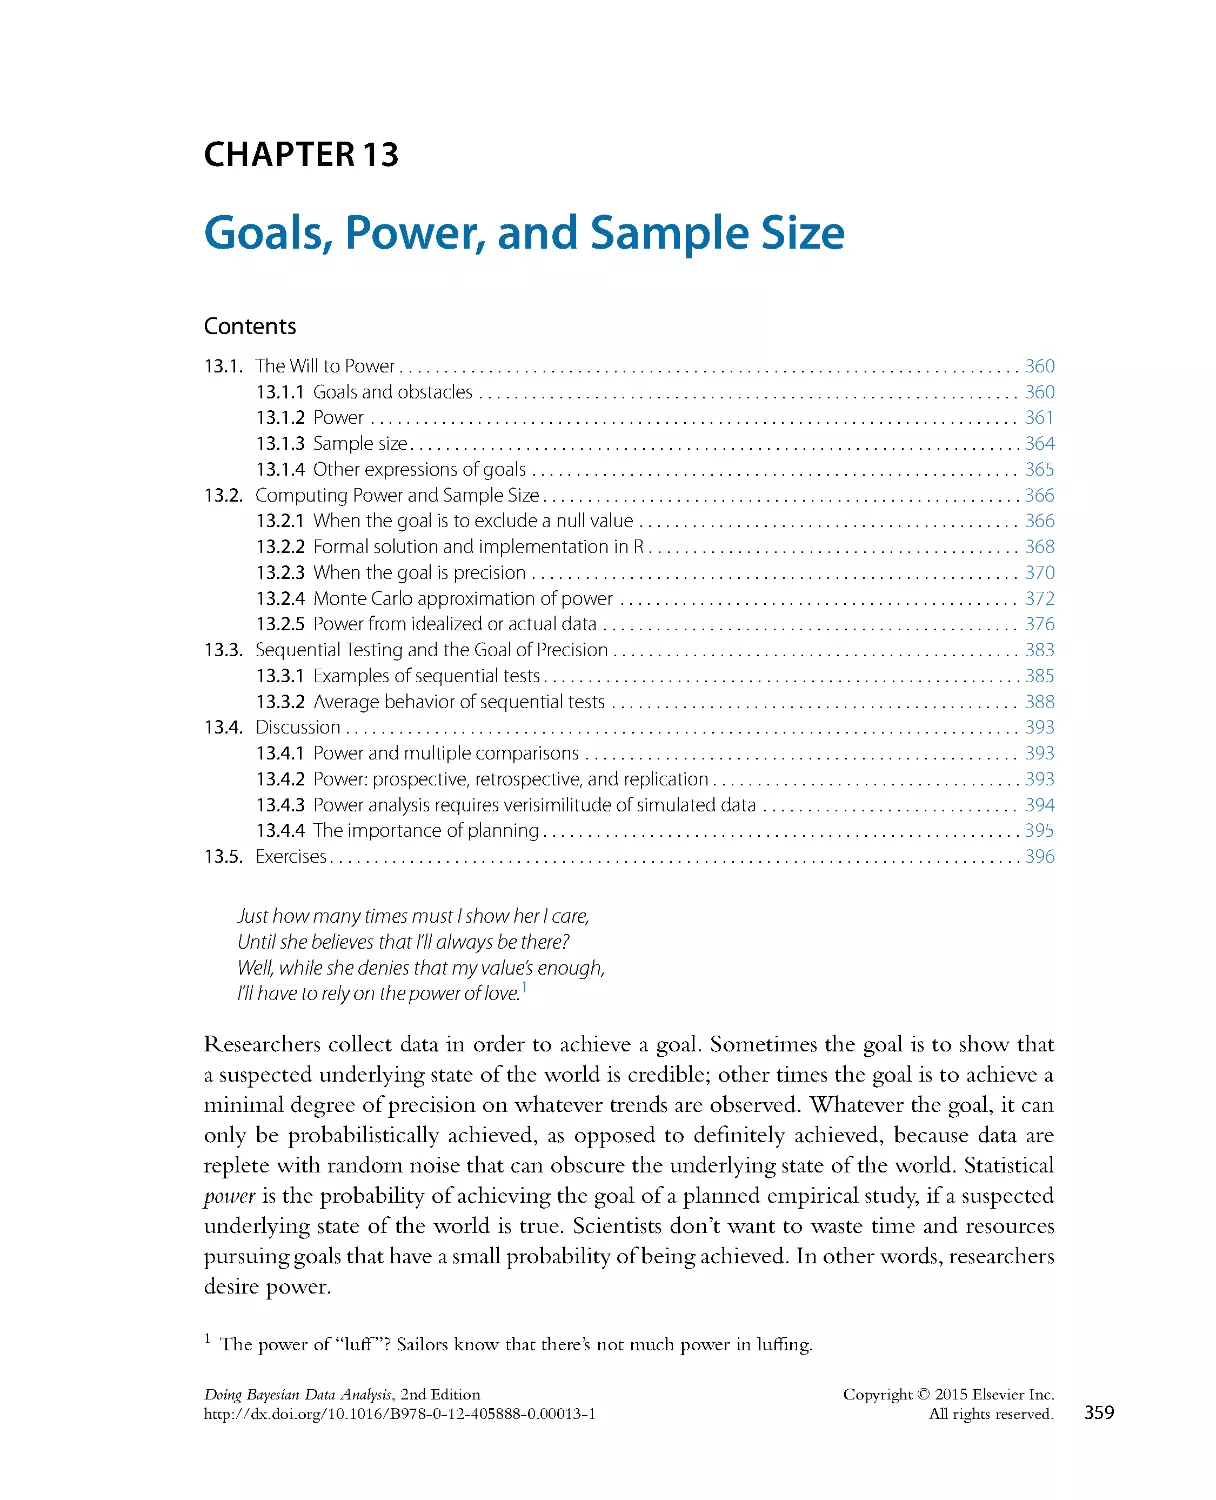 18. Chapter-13-Goals-Power-and-Sample-Size_2015_Doing-Bayesian-Data-Analysis-Second-Edition-